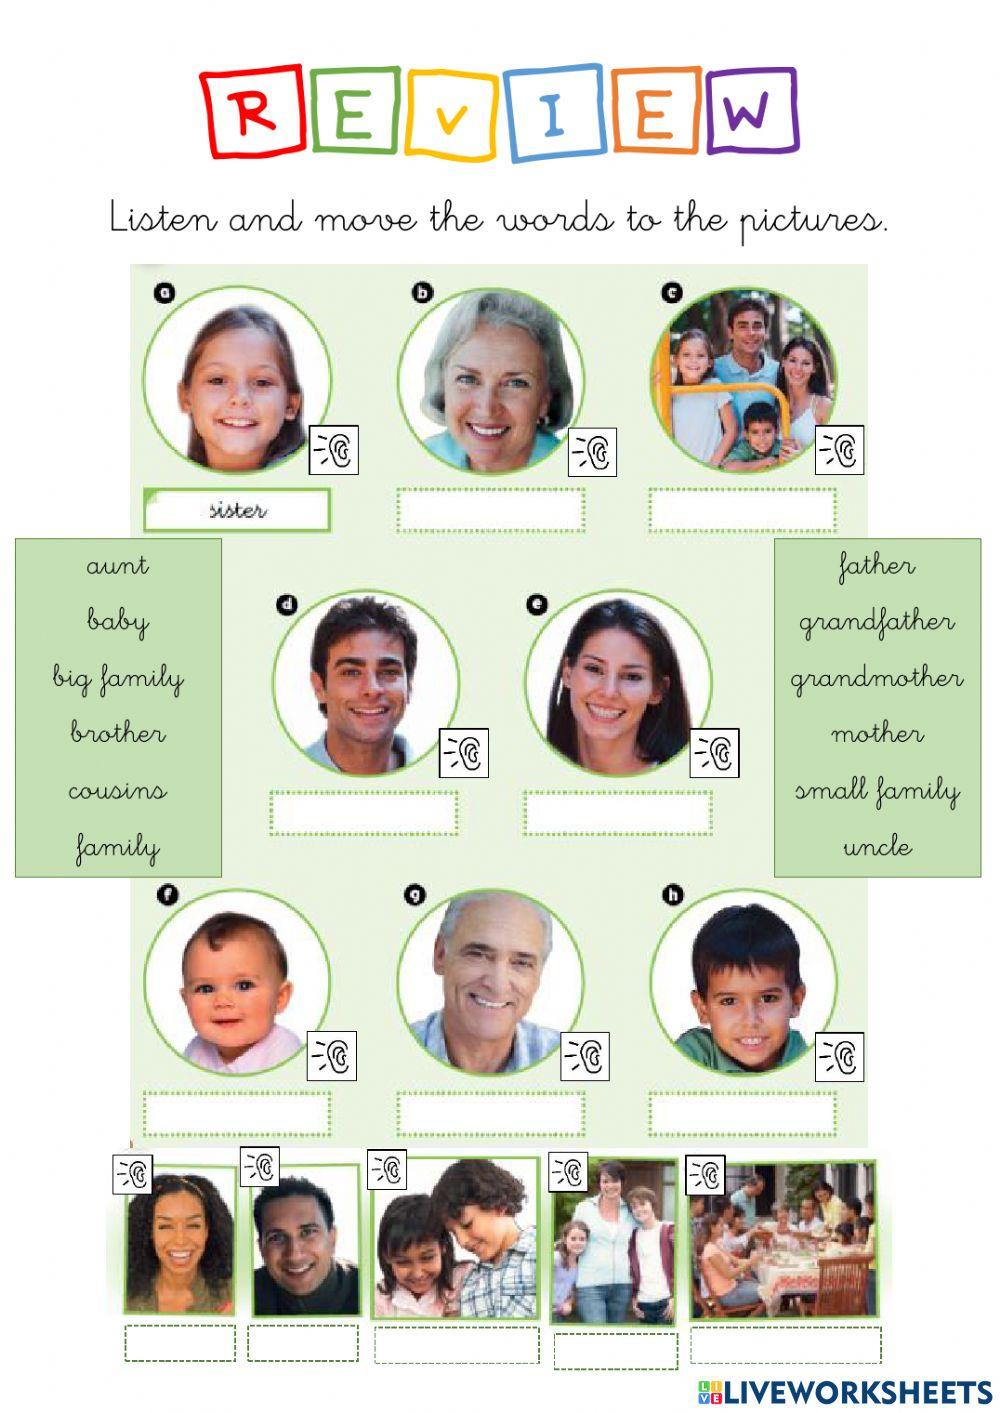 Family and types of families.